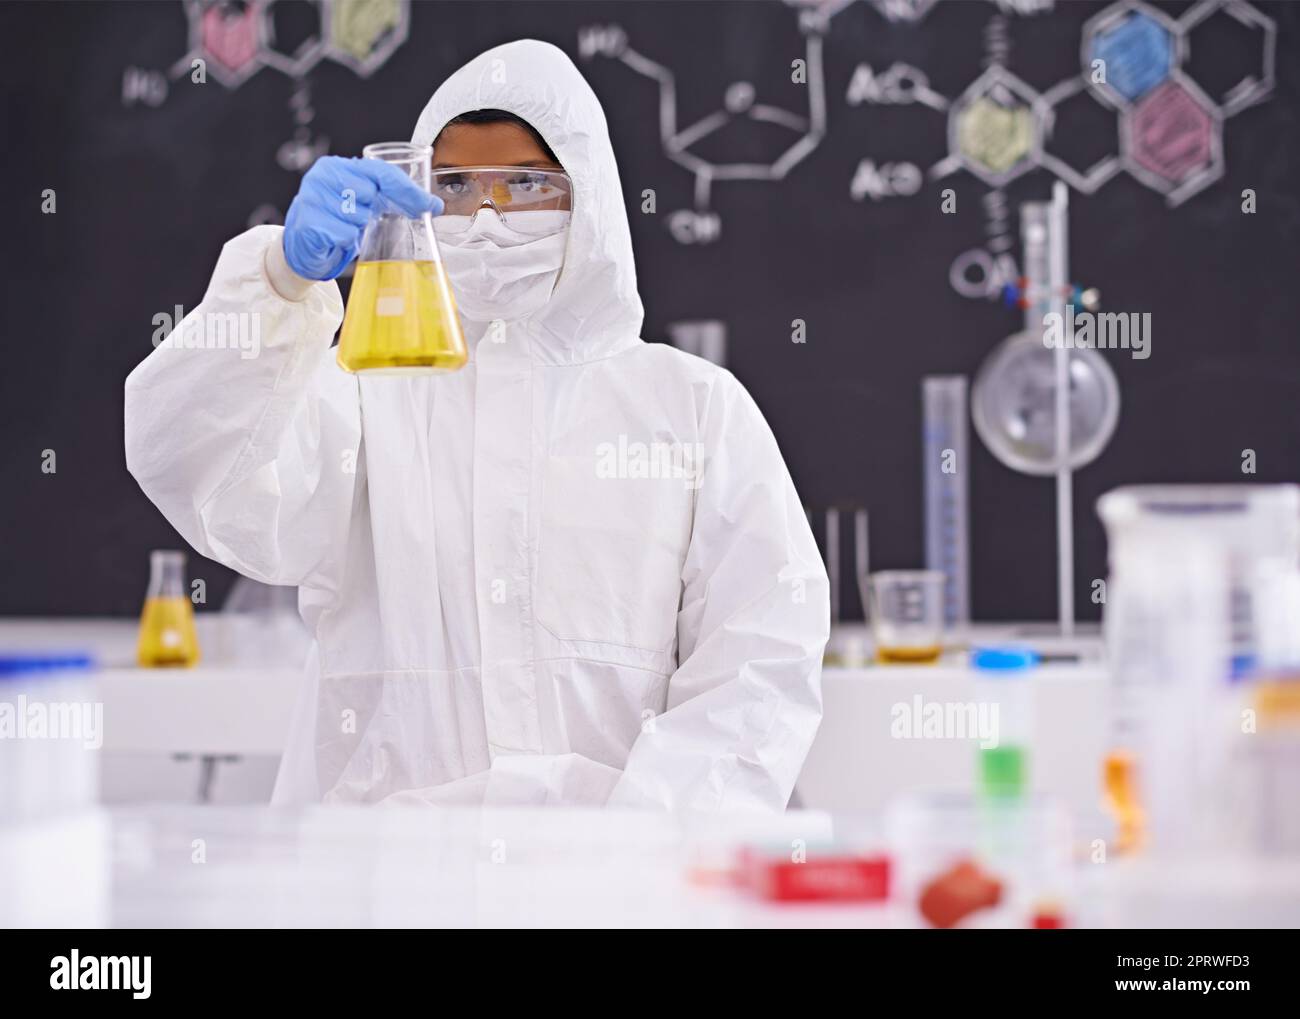 Man Scientists Wear Protective Clothing On Stock Photo 459559240